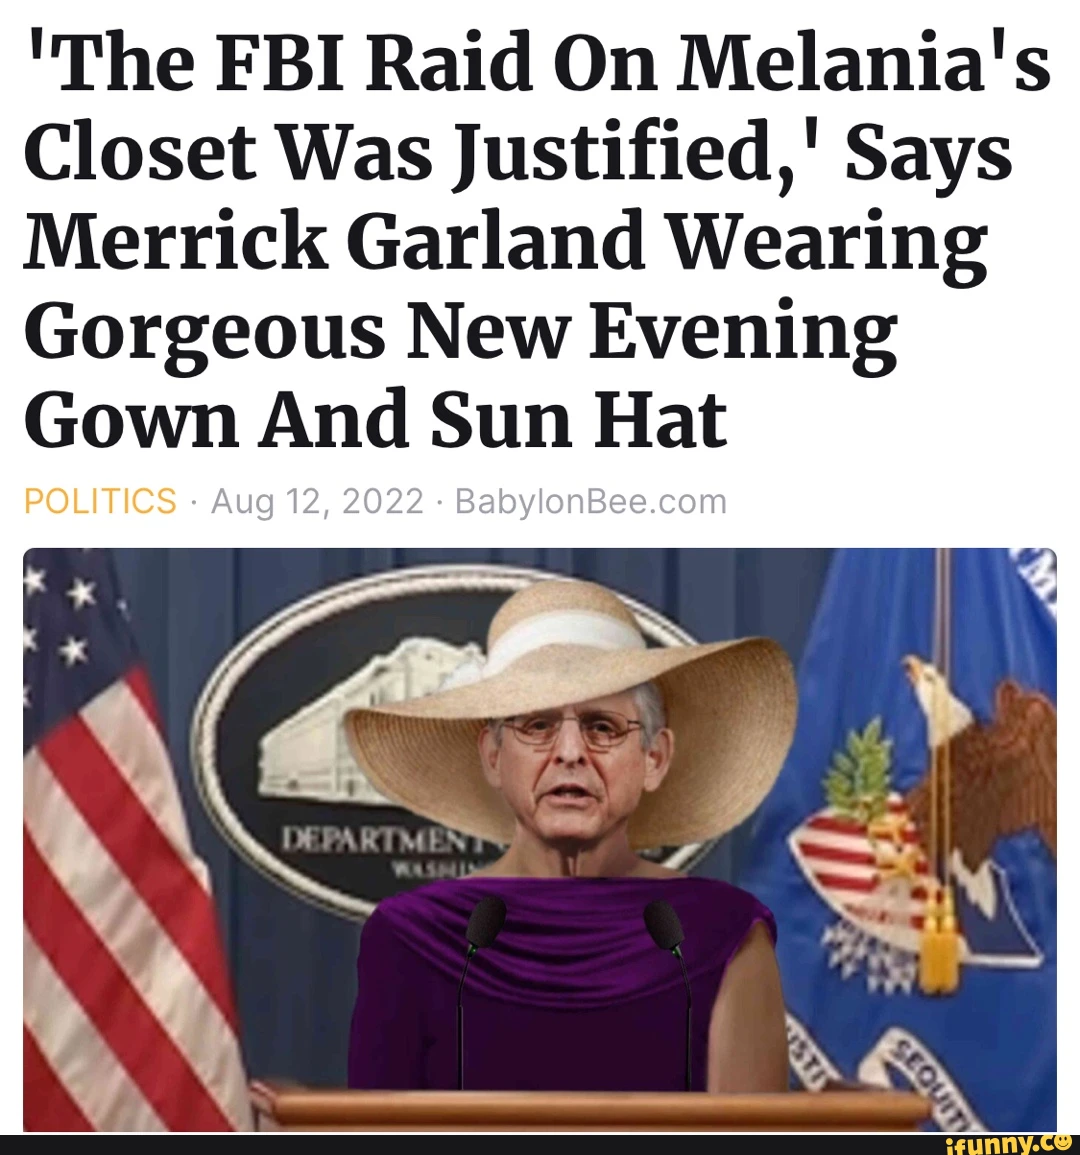 'The FBI Raid On Melania's Closet Was Justified,' Says Merrick Garland Wearing Gorgeous New Evening Gown And Sun Hat POLITICS Aug 12, 2022